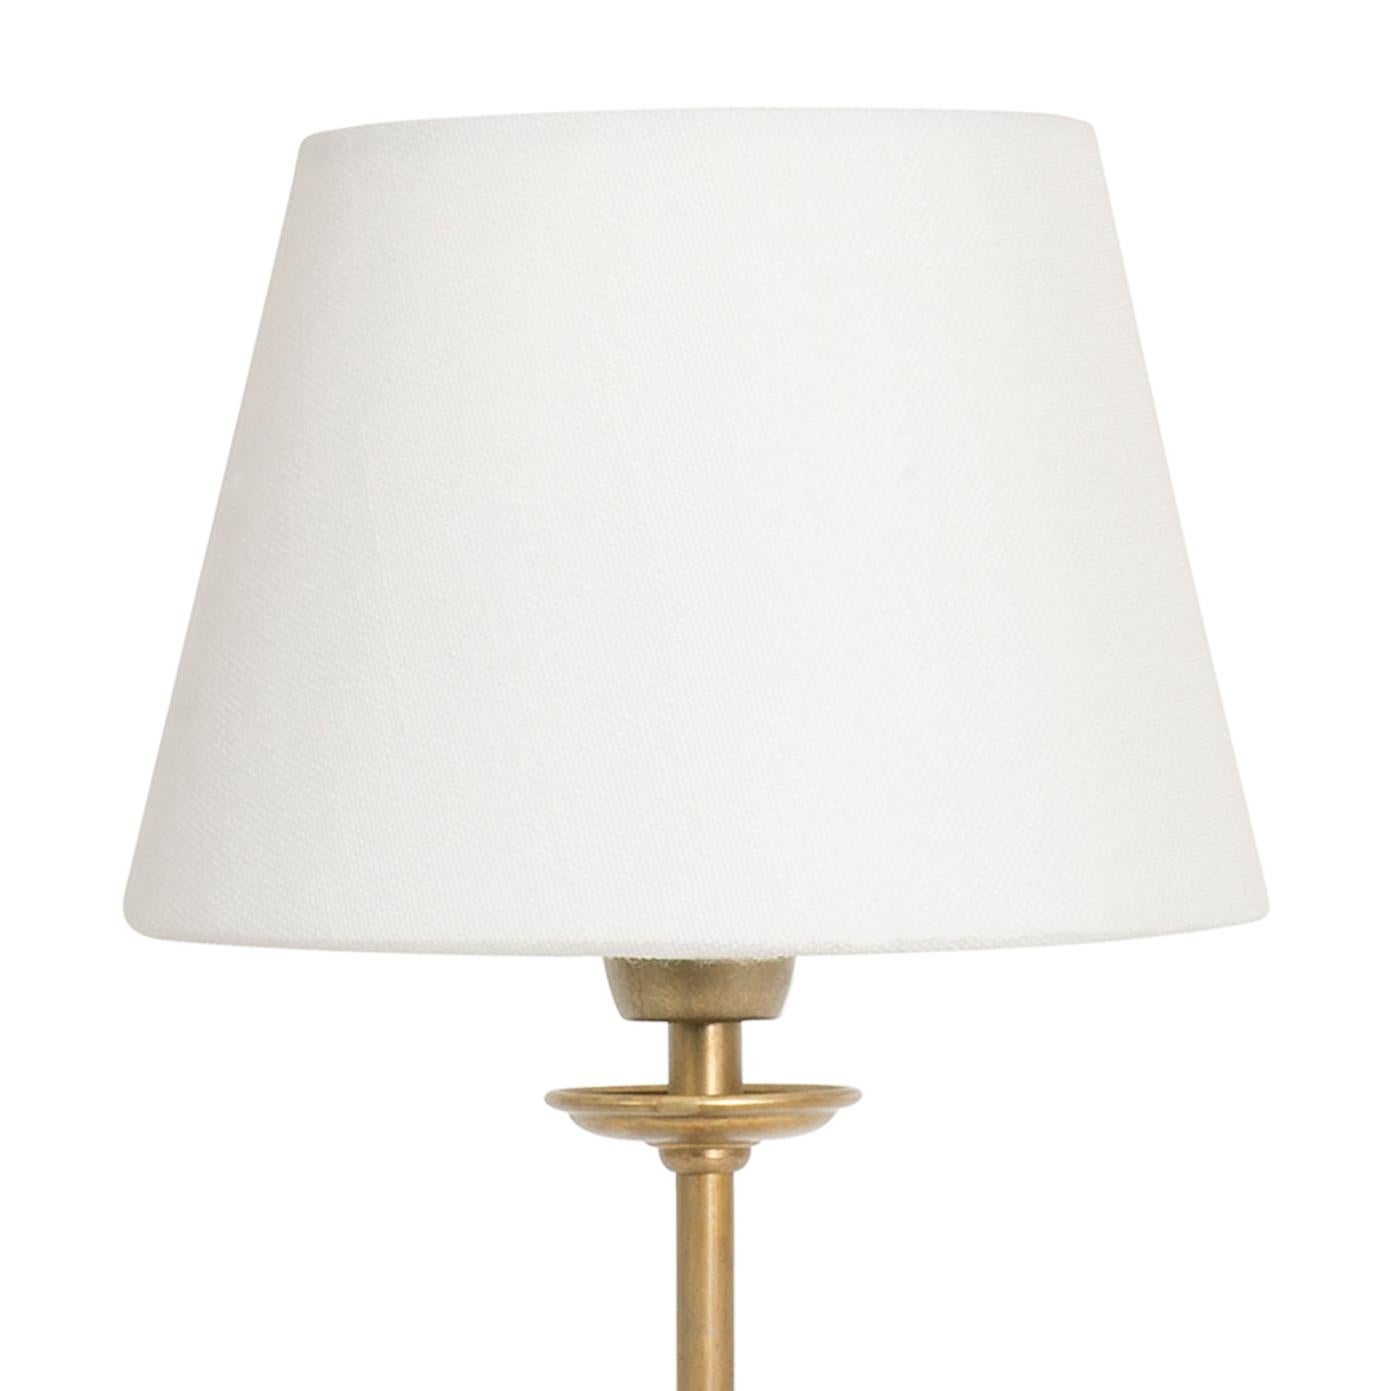 Lamp model Uno medium raw brass table lamp designed by Konsthantverk and manufactured by themselves.

The production of lamps, wall lights and floor lamps are manufactured using craftsman’s techniques with the same materials and techniques as the